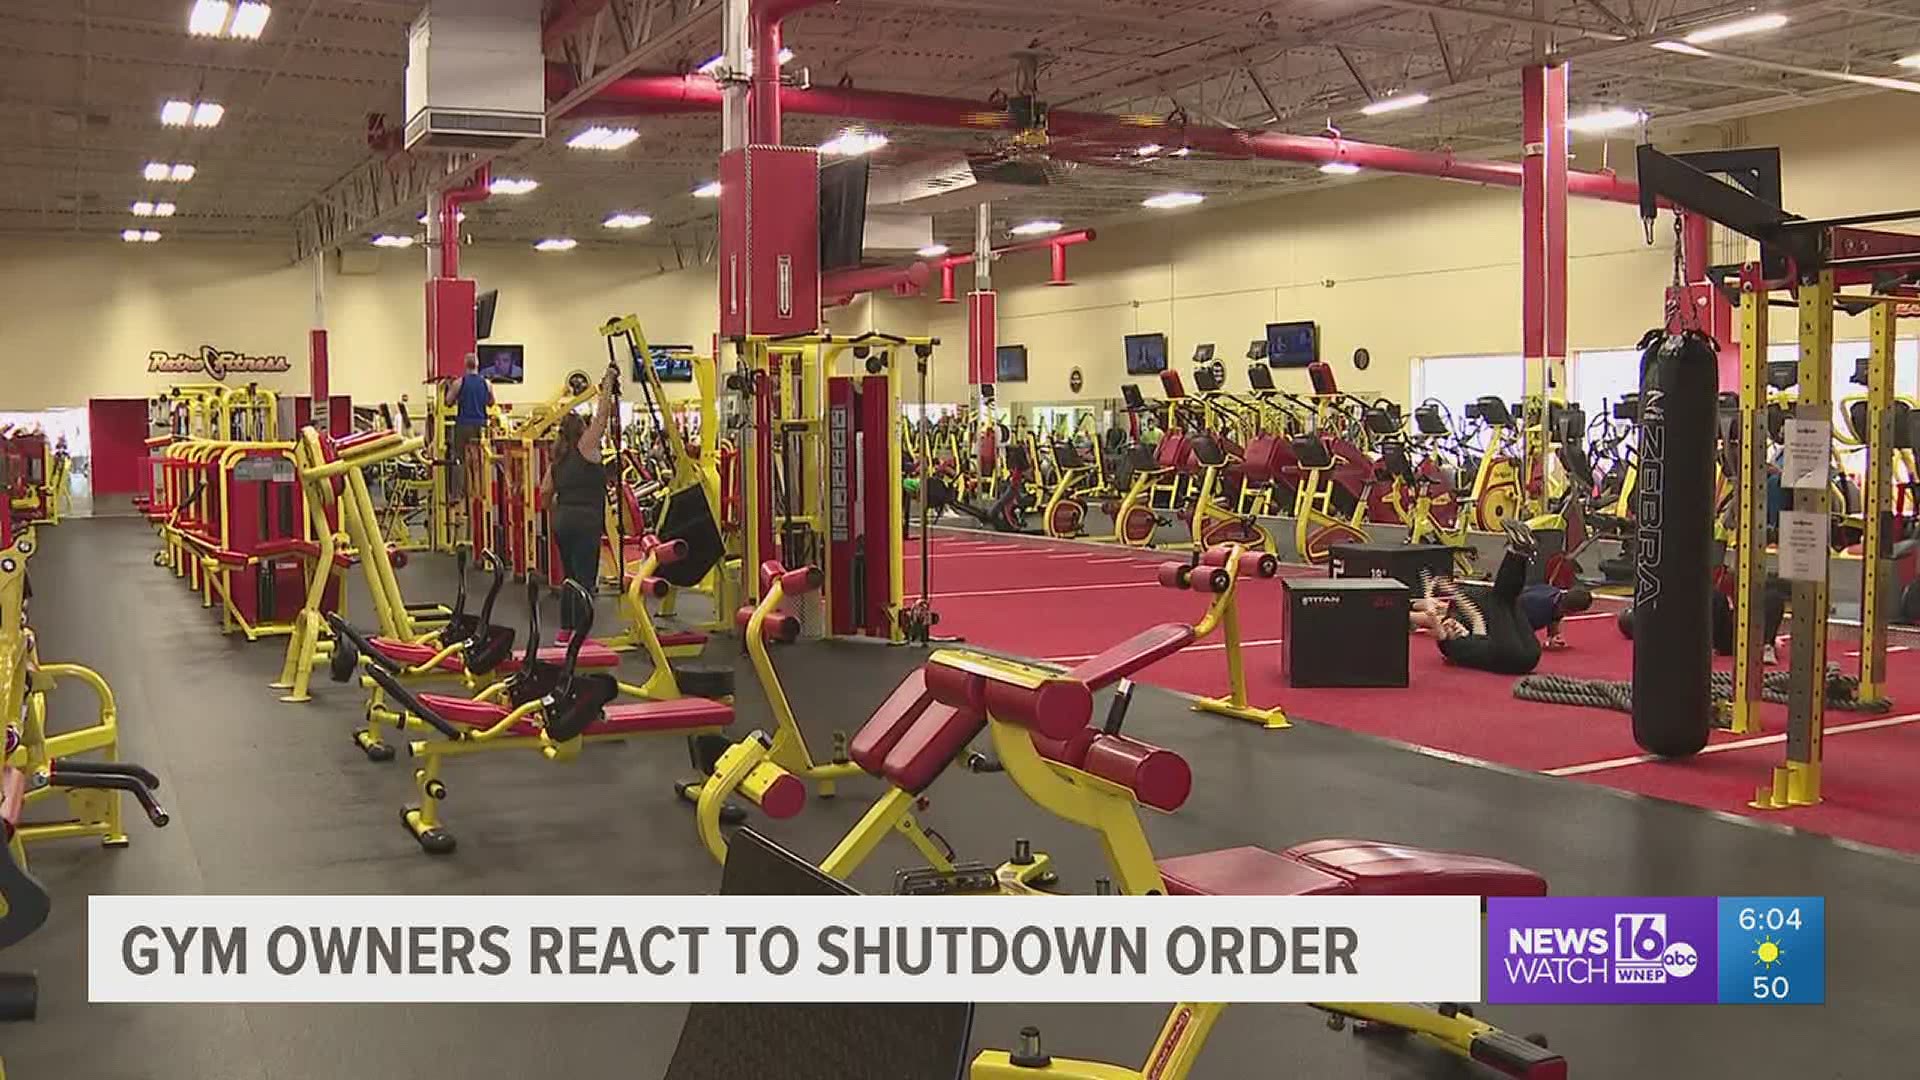 Managers and those who workout at Retro Fitness in Monroe County are upset to see yet another shutdown, but understand that safety comes first.